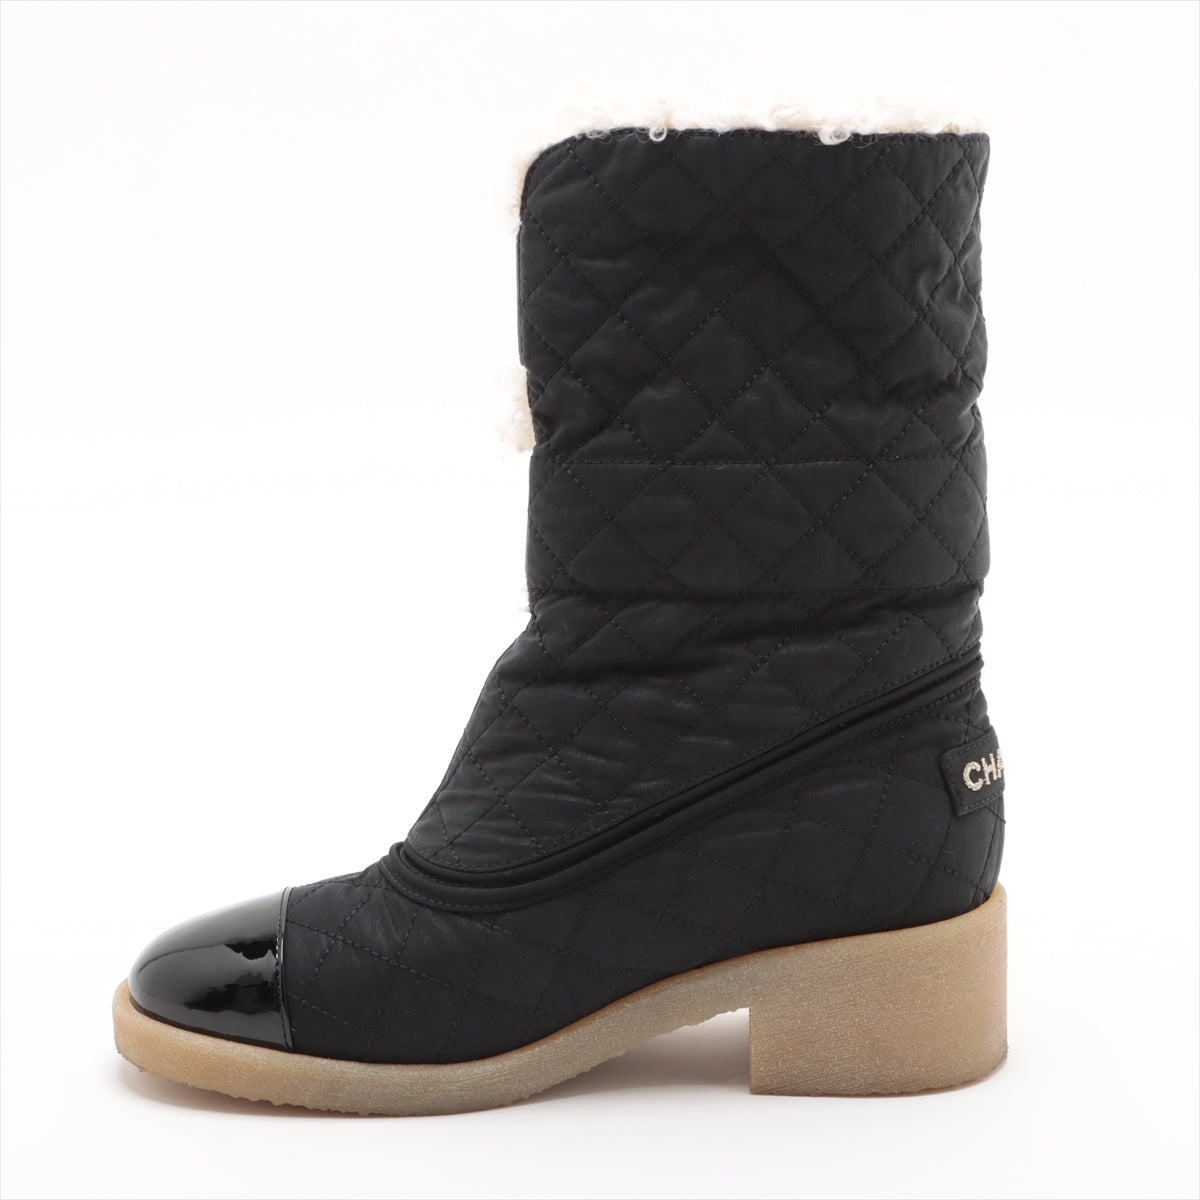 Chanel Coco Mark Matelasse Patent leather x fabric Short Boots 36 Ladies' Black G36702 double turn lock insole wool